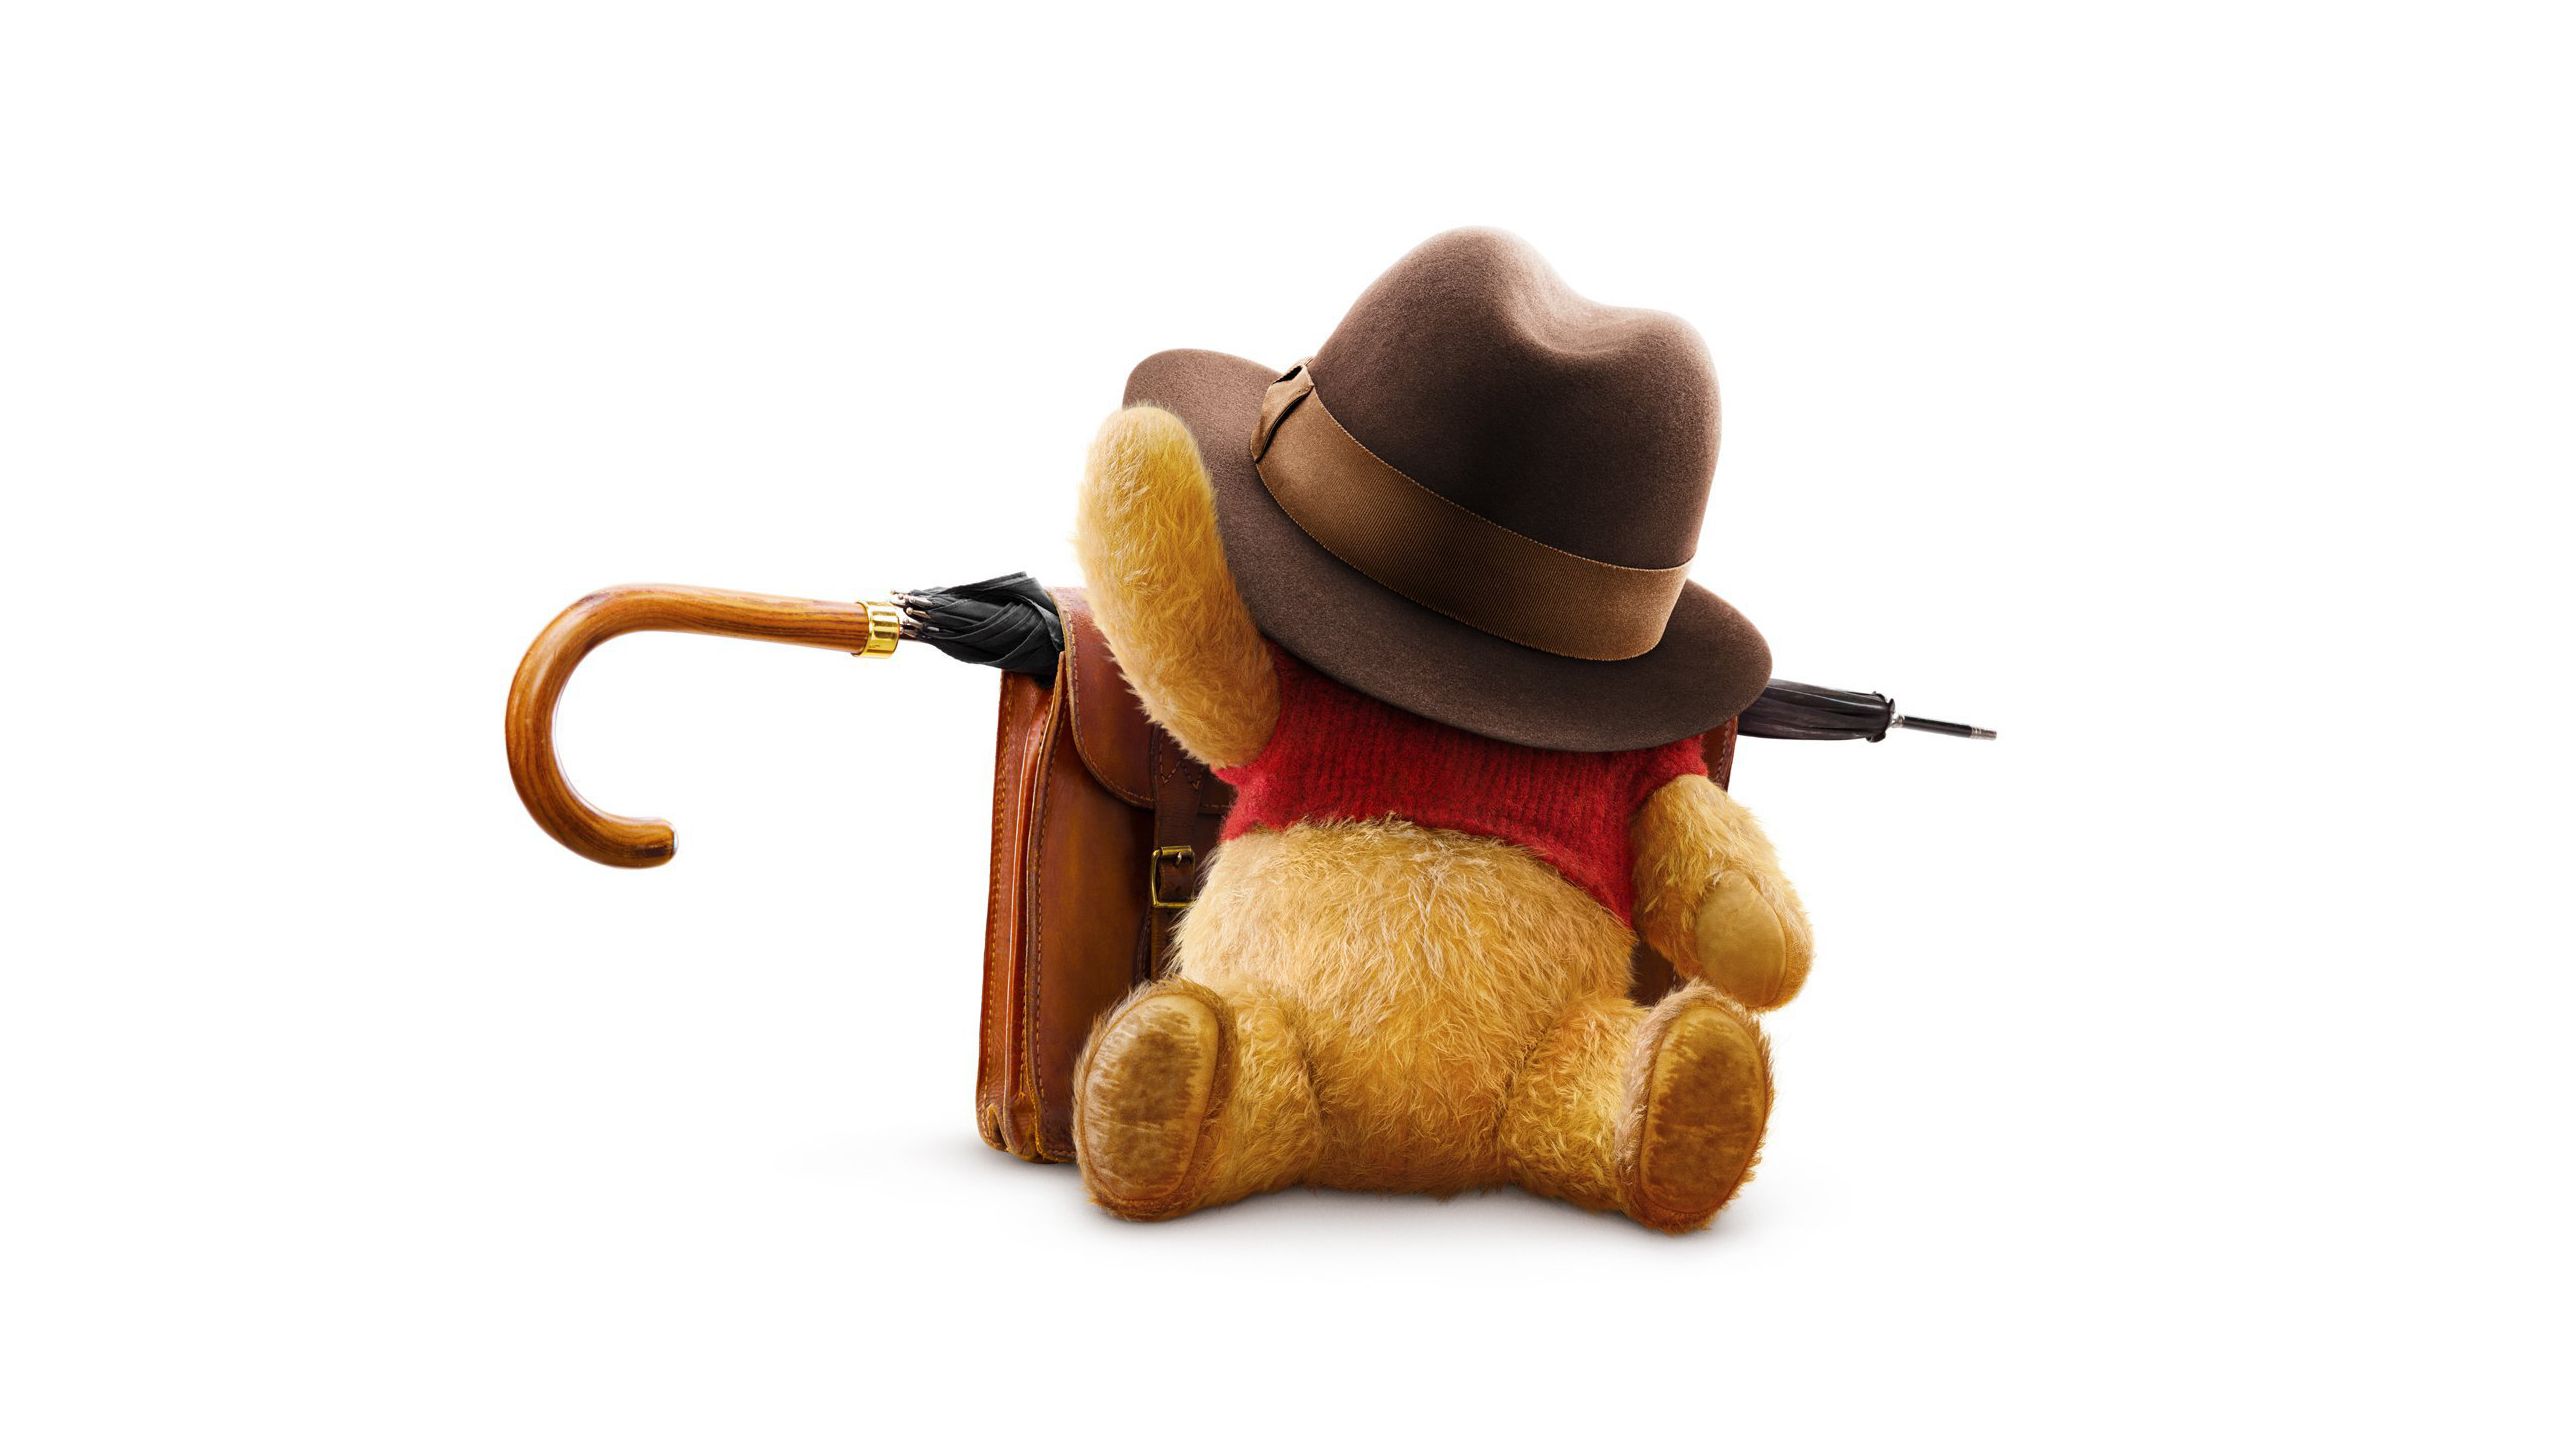 Christopher Robin 2018 Wallpapers